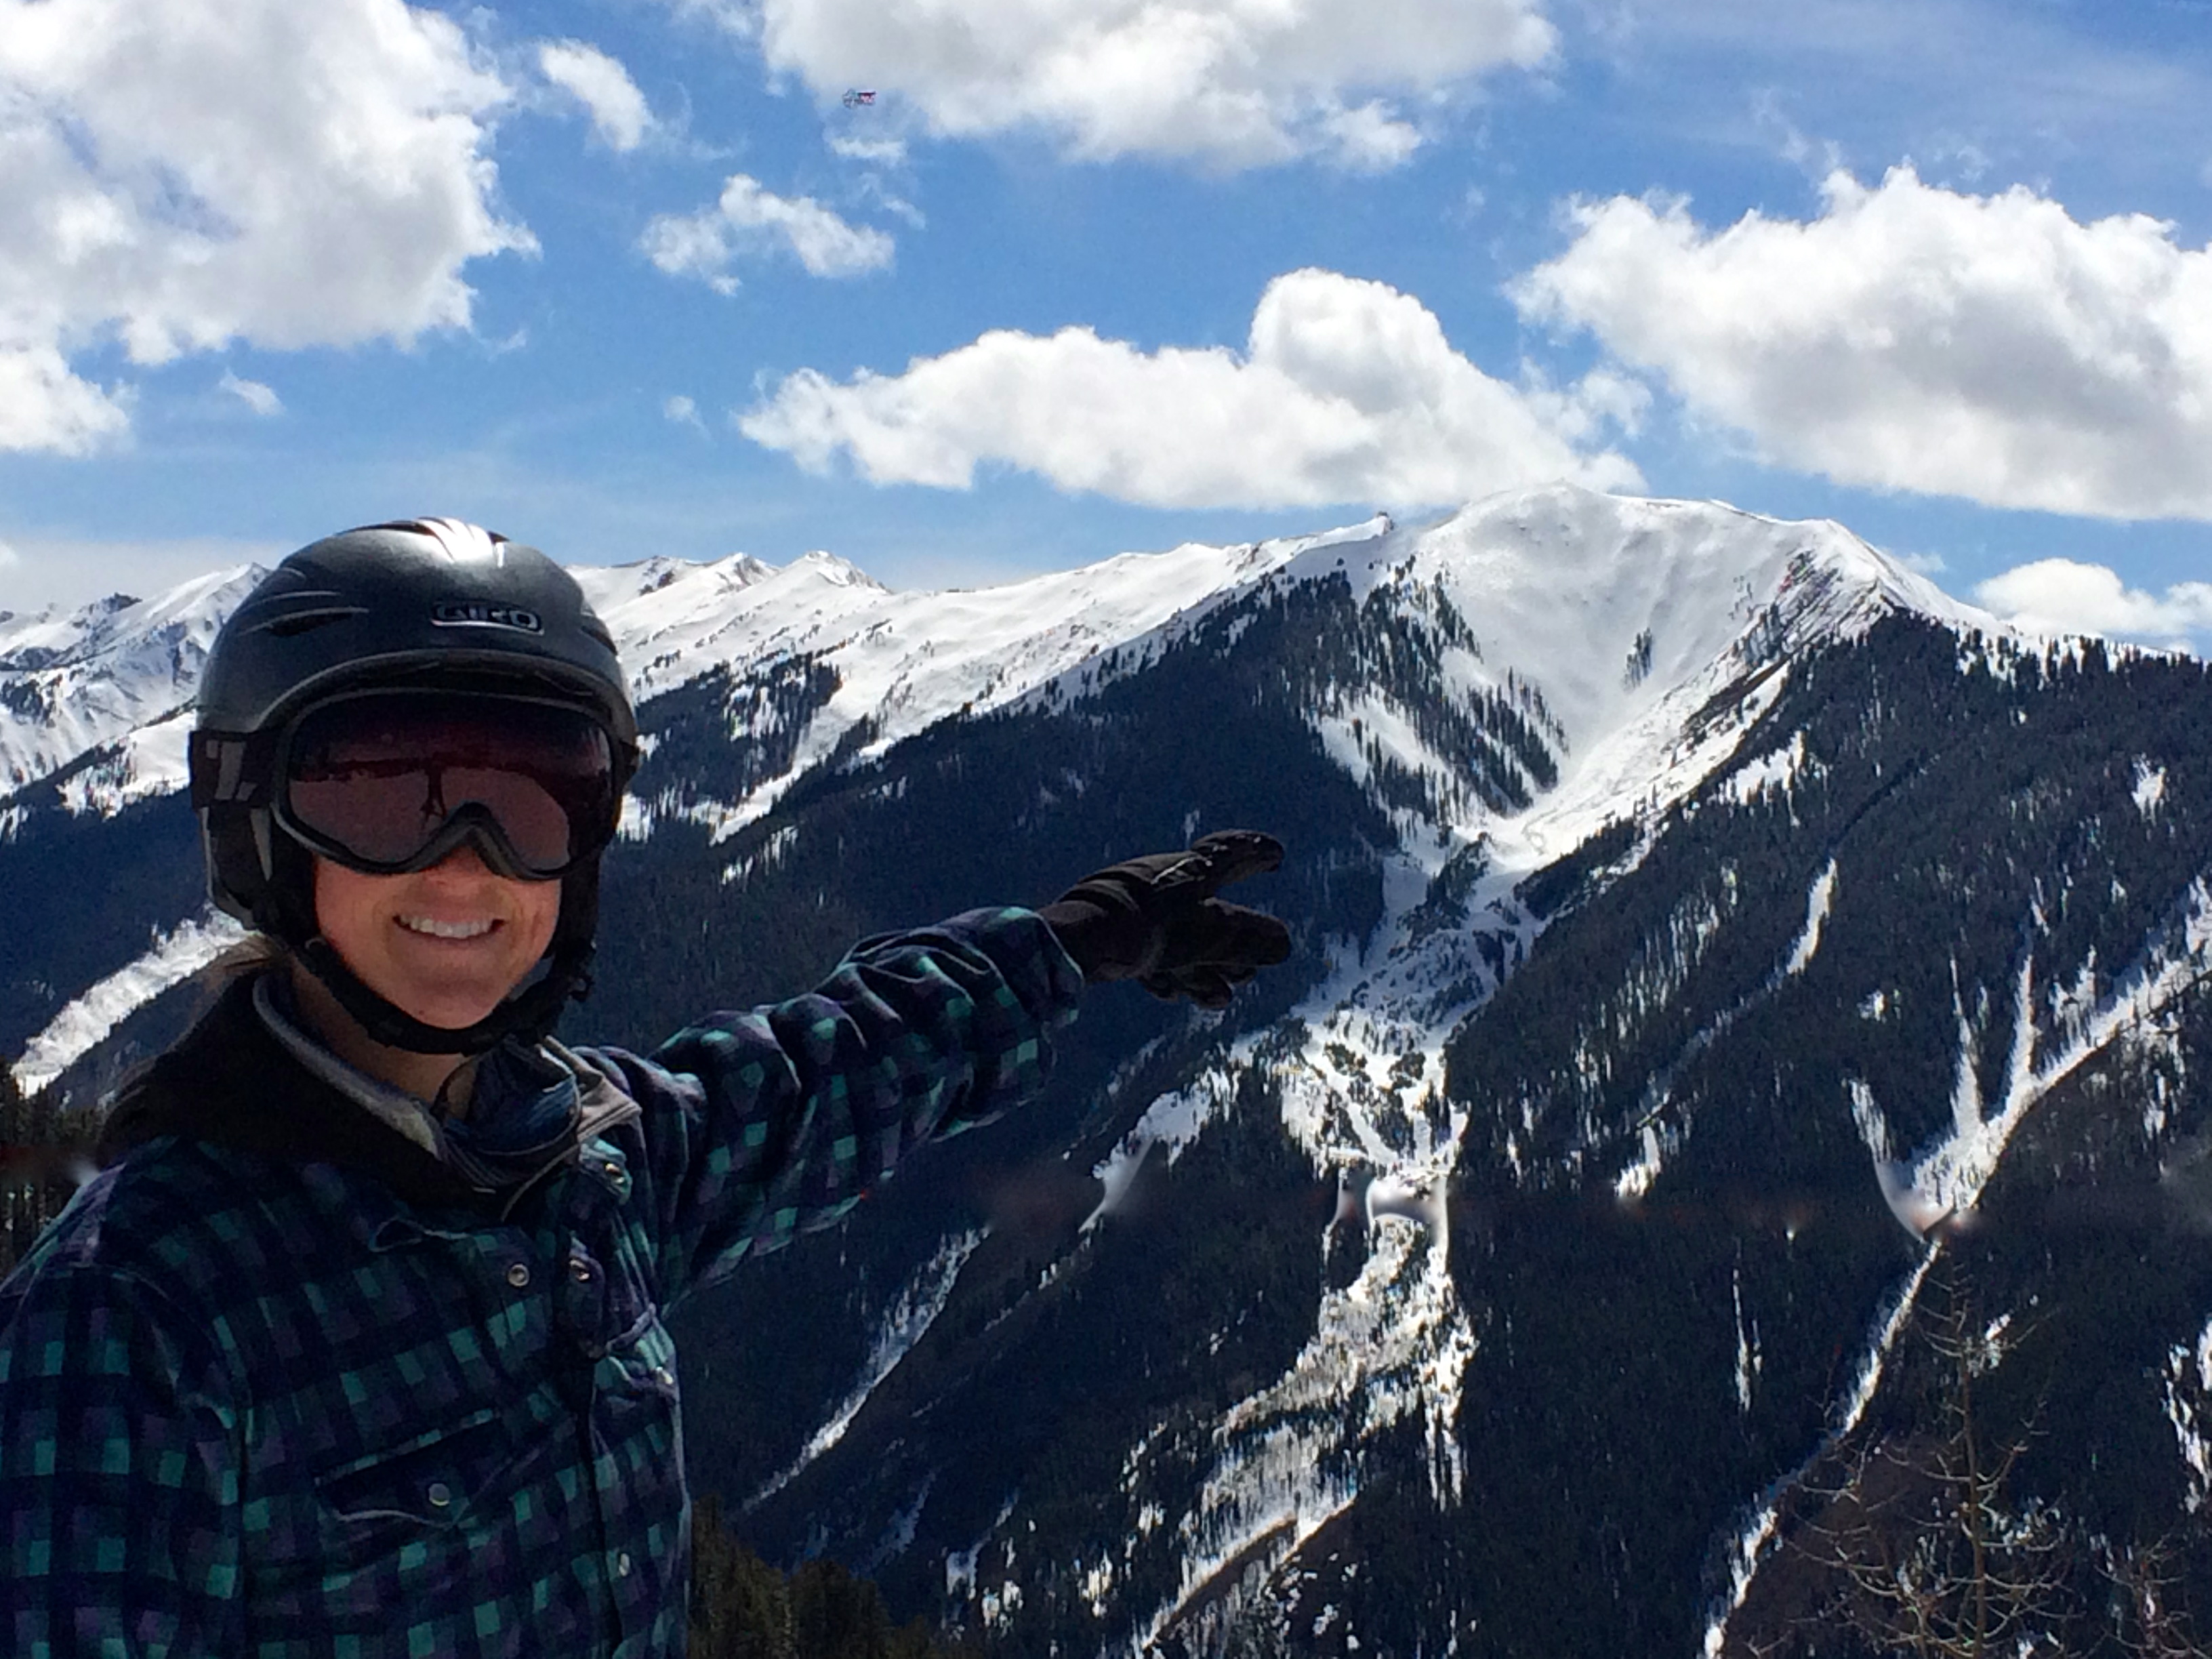 Alyssa pointing out Highlands Bowl across the way when I skied with her in Aspen last spring.